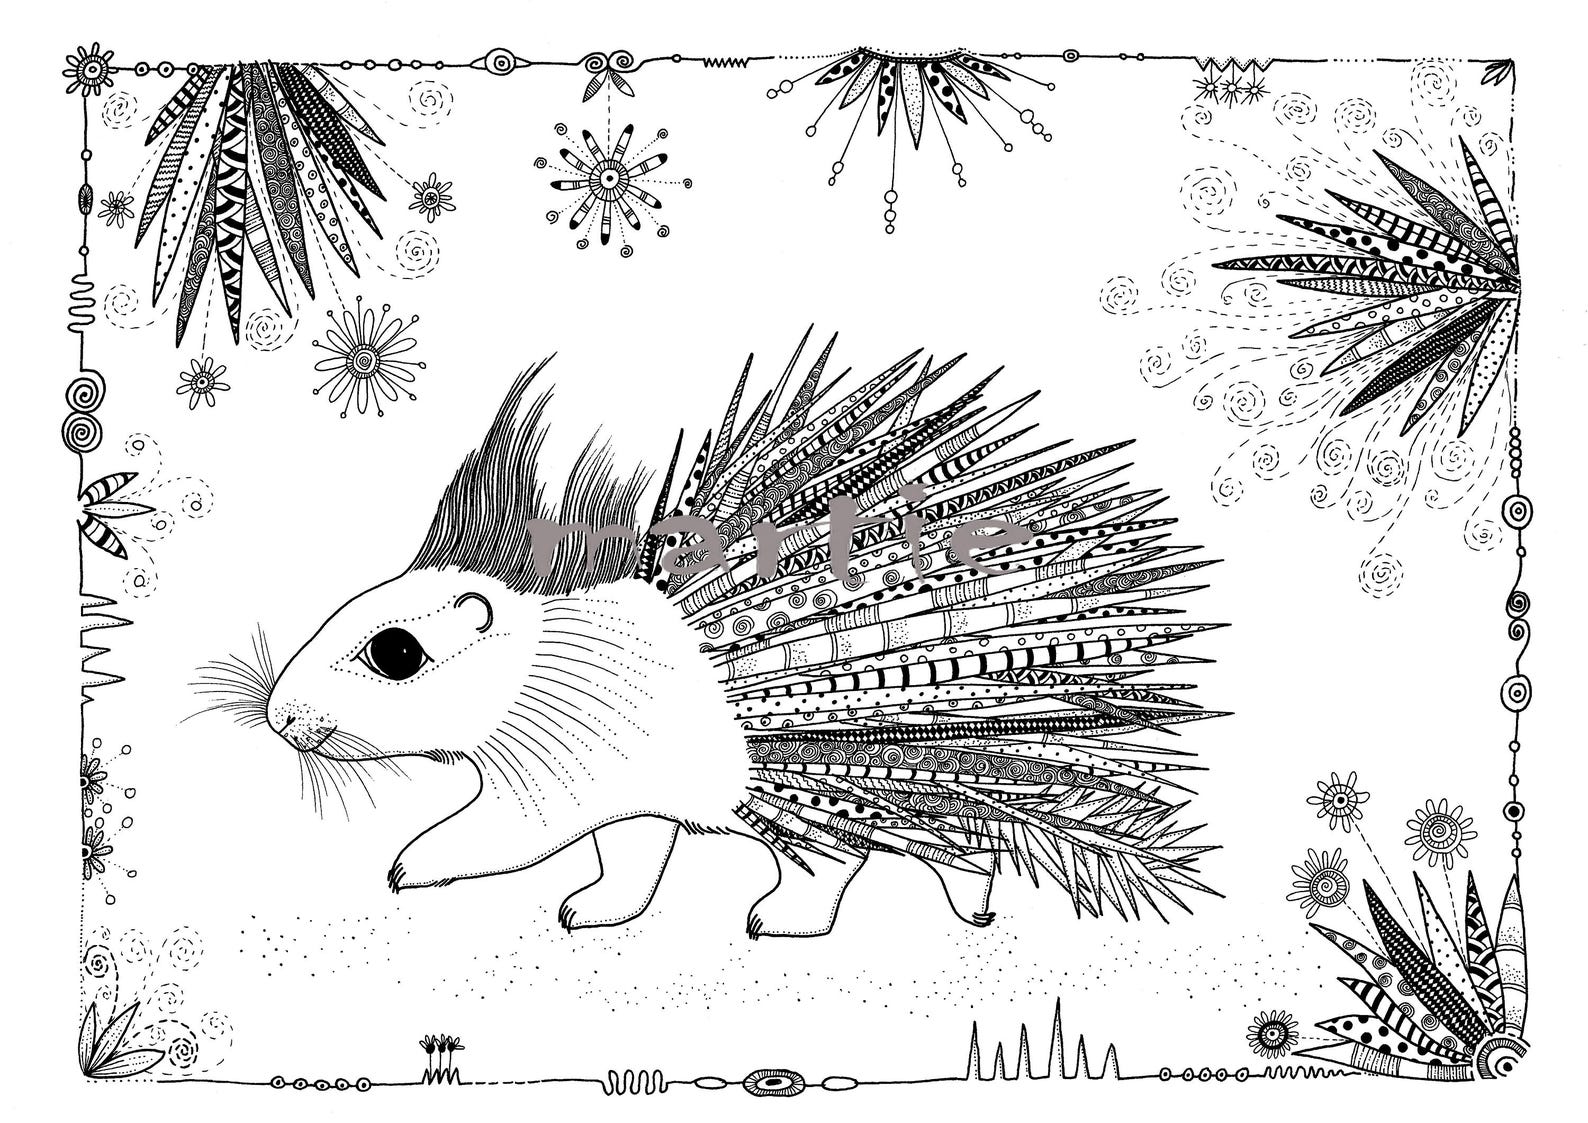 Printable Whimsical Porcupine Coloring Page for Kids and | Etsy